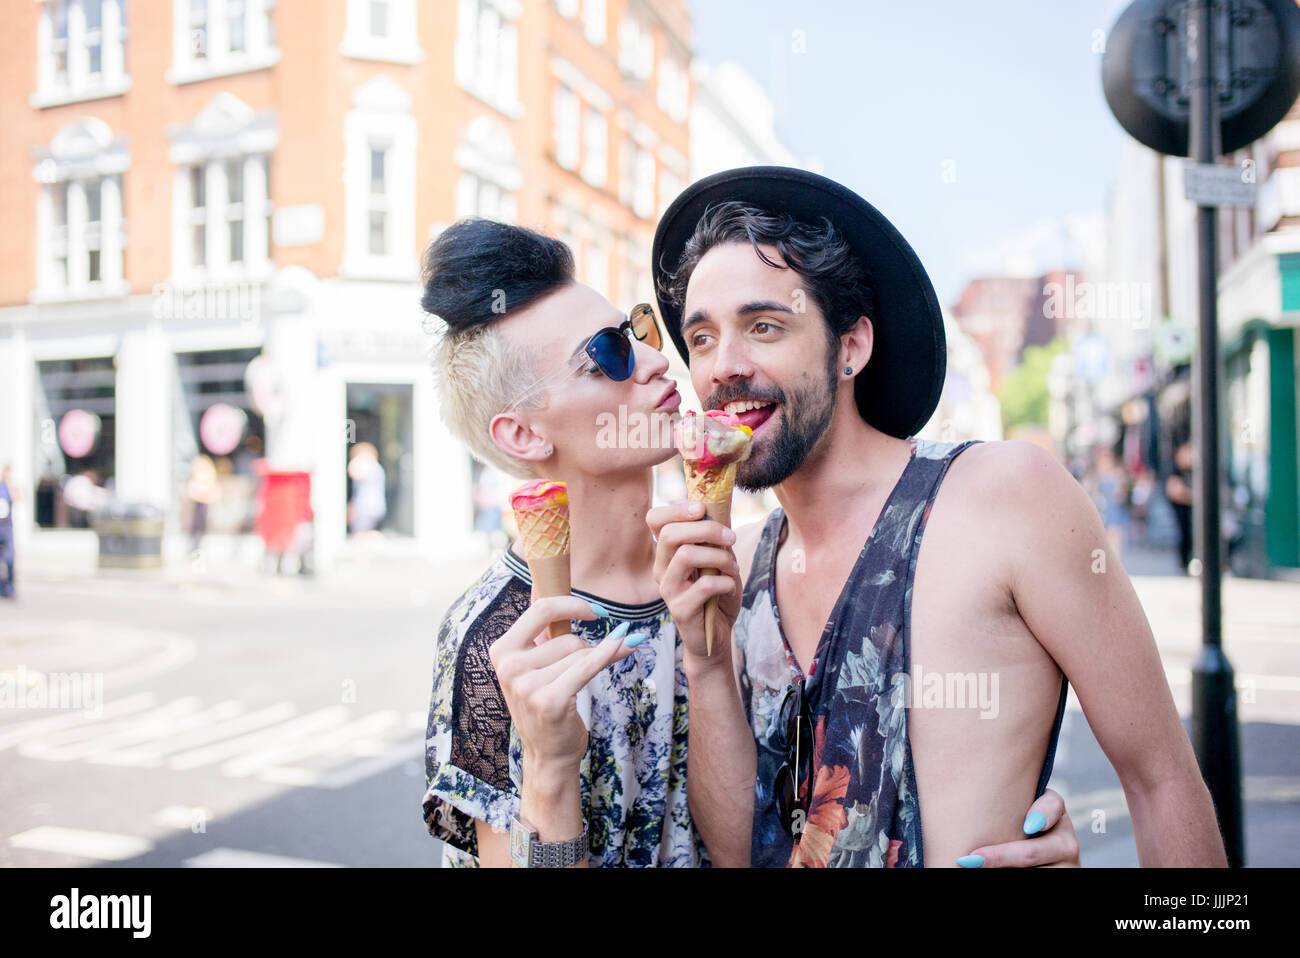 A gay couple enjoy an ice cream on a day out in London. Stock Photo